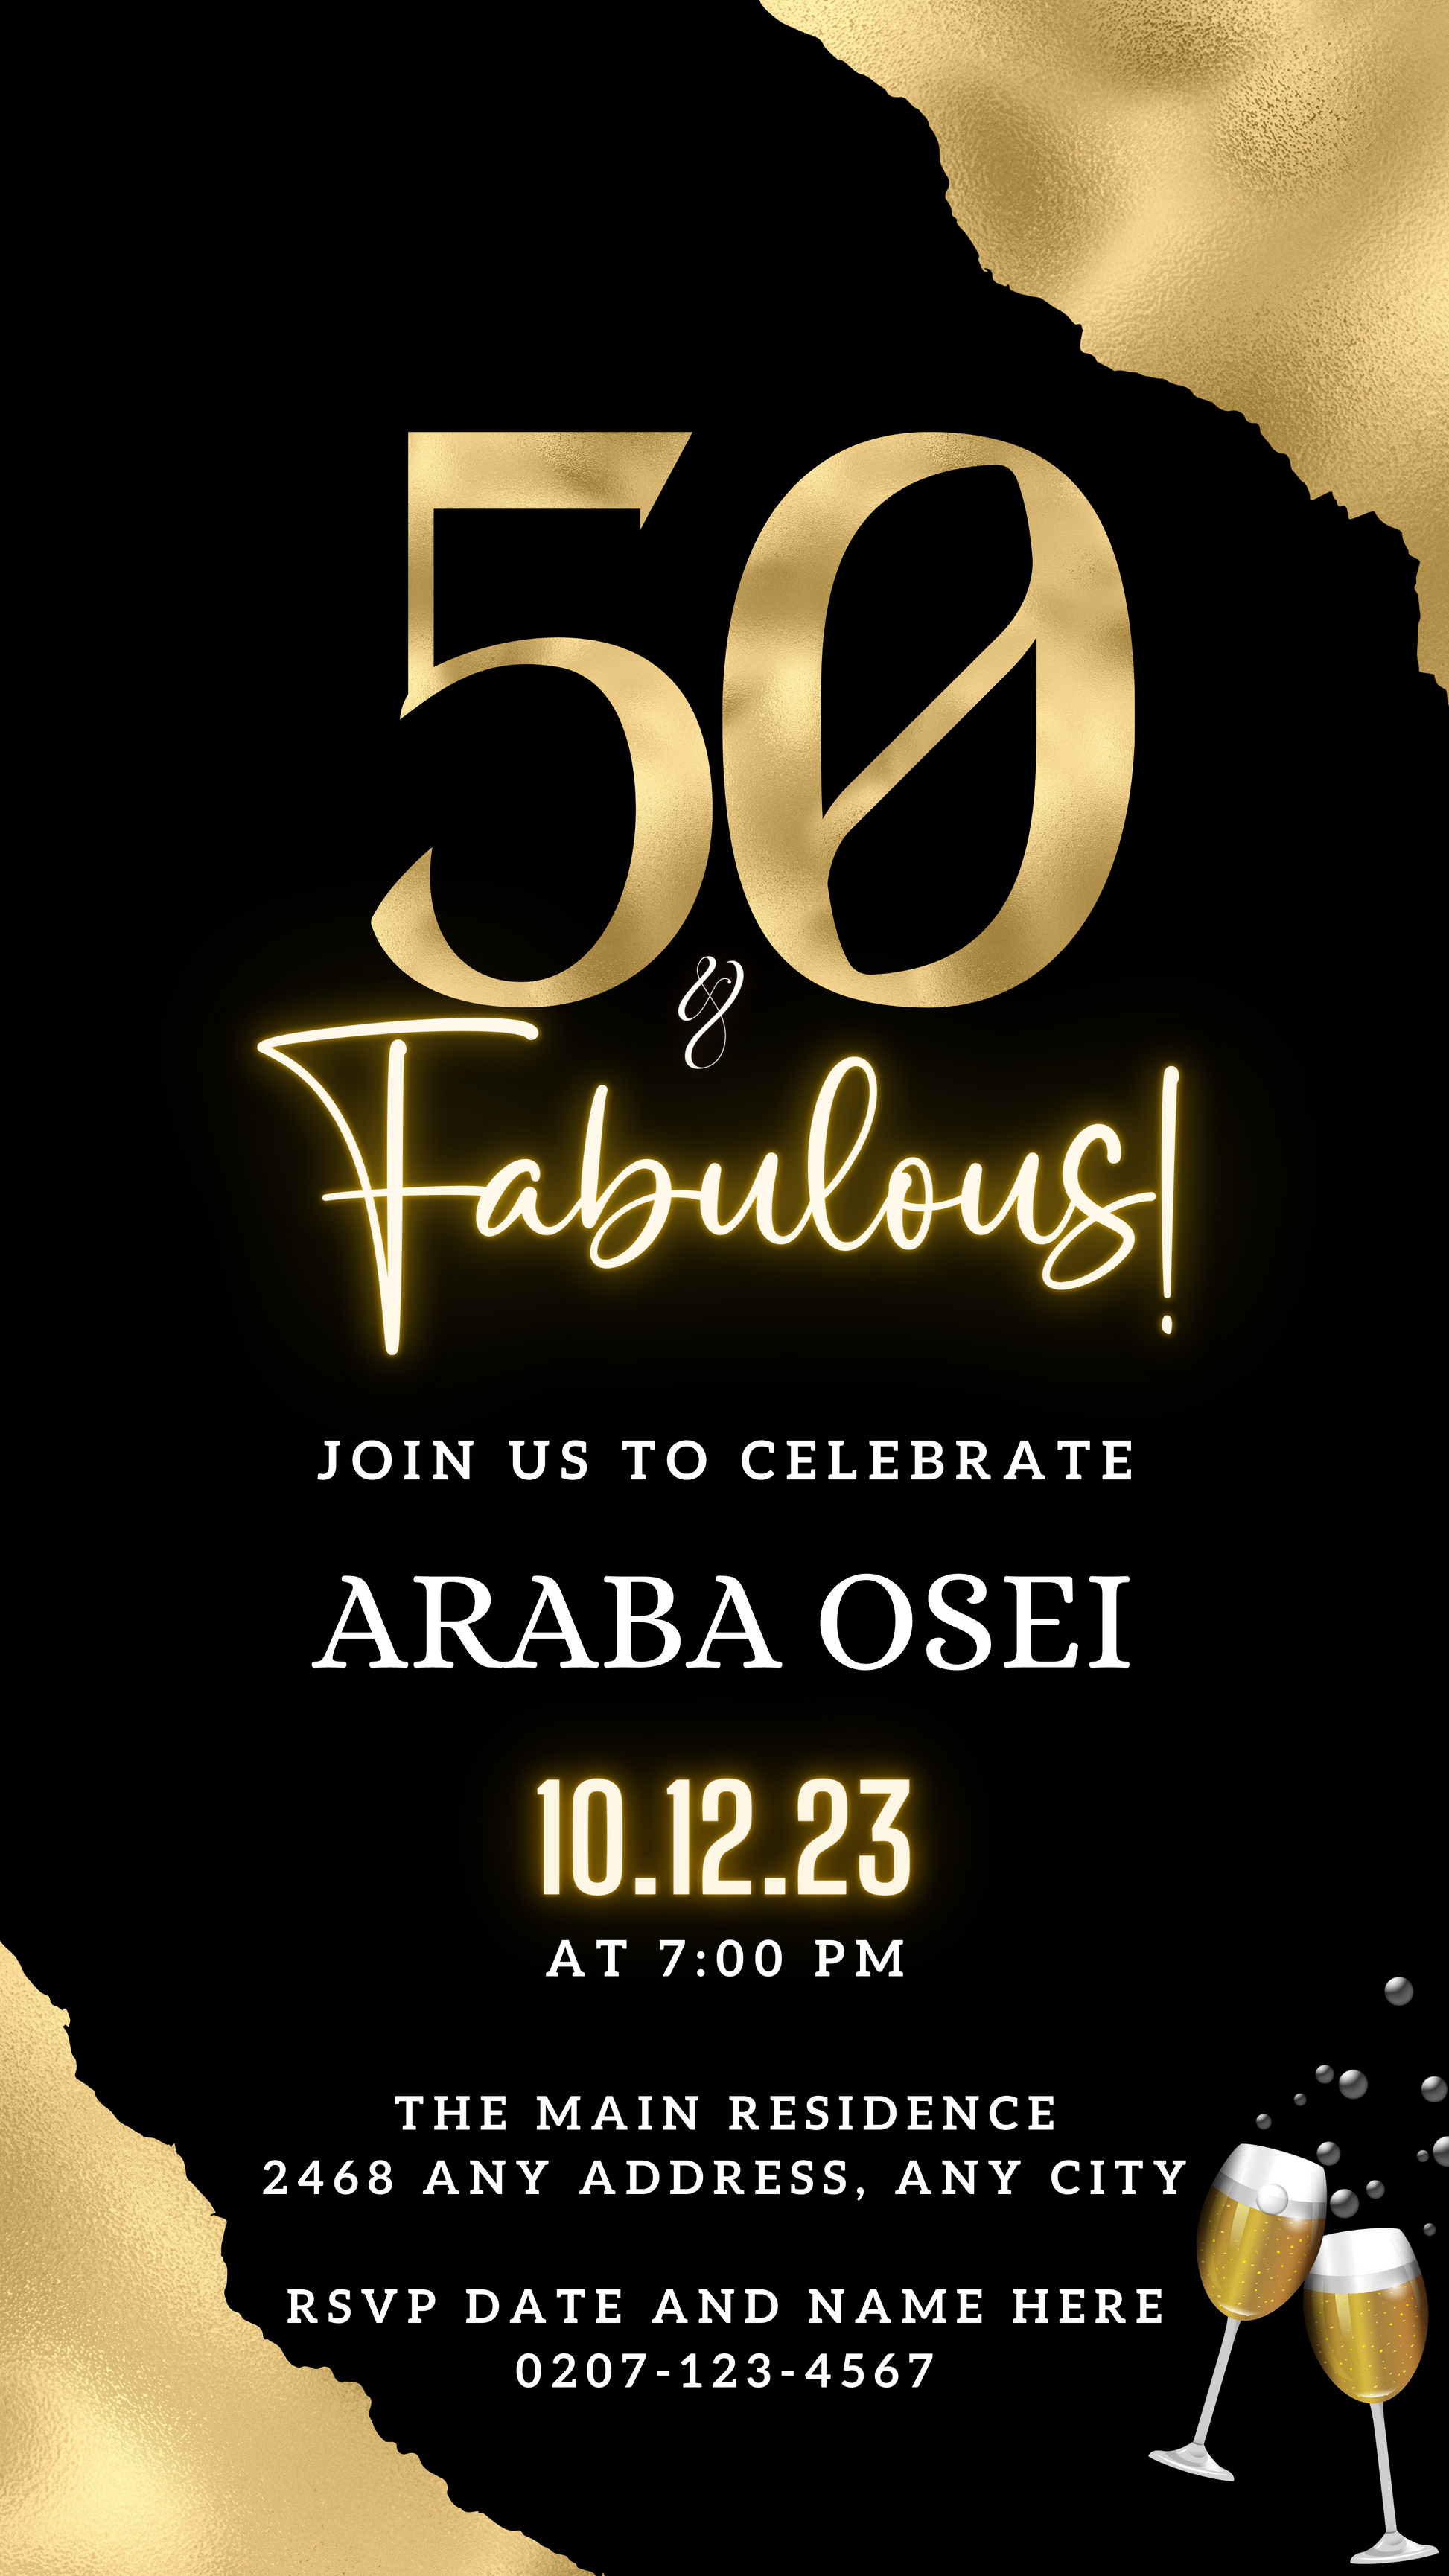 Customizable digital invitation with black and gold design, titled Gold Neon Black | 50 & Fabulous Party Evite, editable via Canva for easy personalization and electronic sharing.